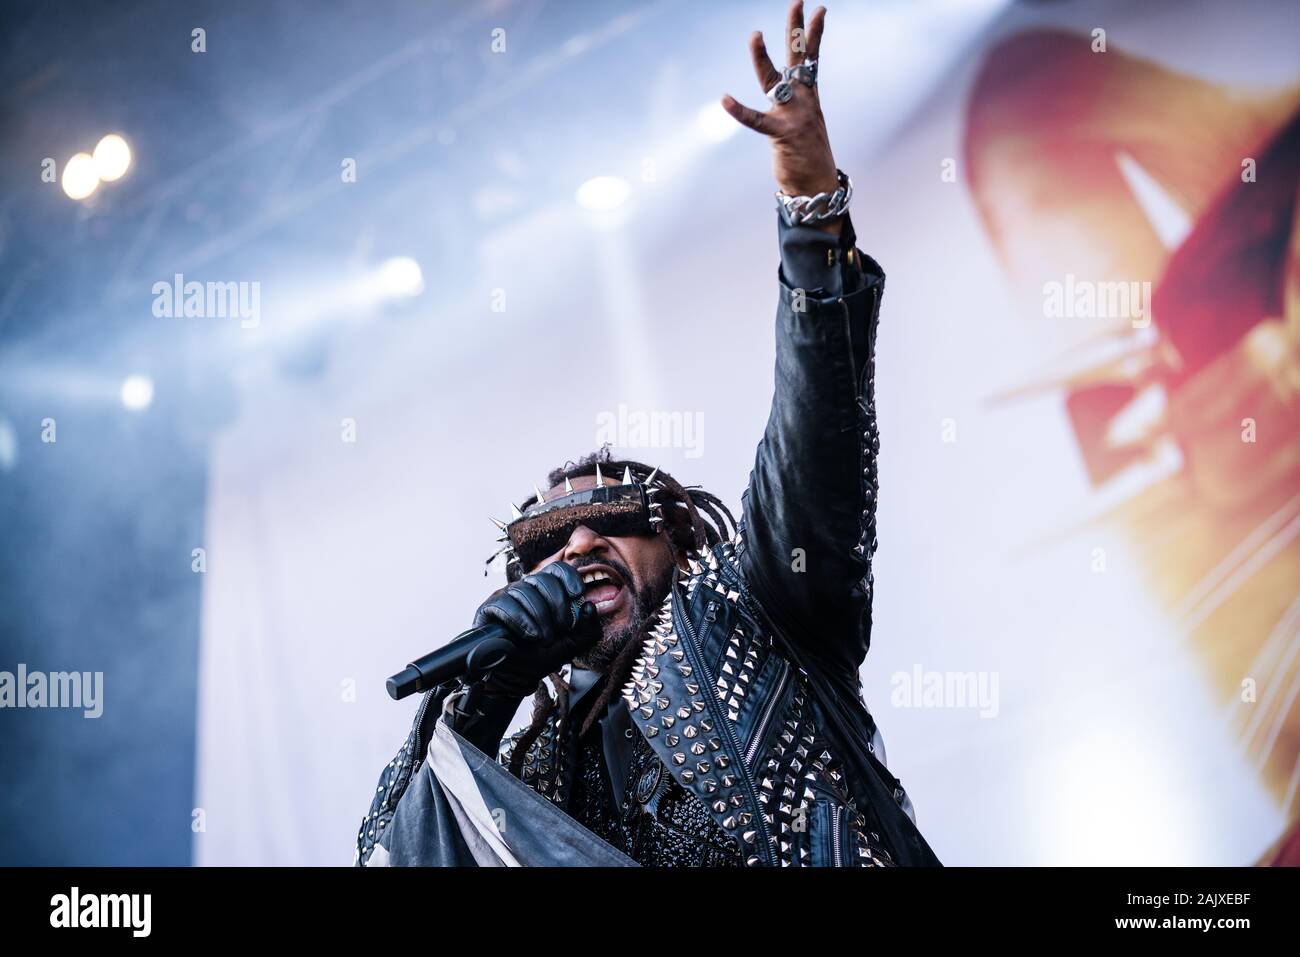 Copenhagen, Denmark - June 20th, 2019. The Welsh metal band Skindred performs a live concert during the Danish heavy metal festival Copenhell 2019 in Copenhagen. Here vocalist Benji Webbe is seen live on stage. (Photo credit: Gonzales Photo - Mathias Kristensen). Stock Photo